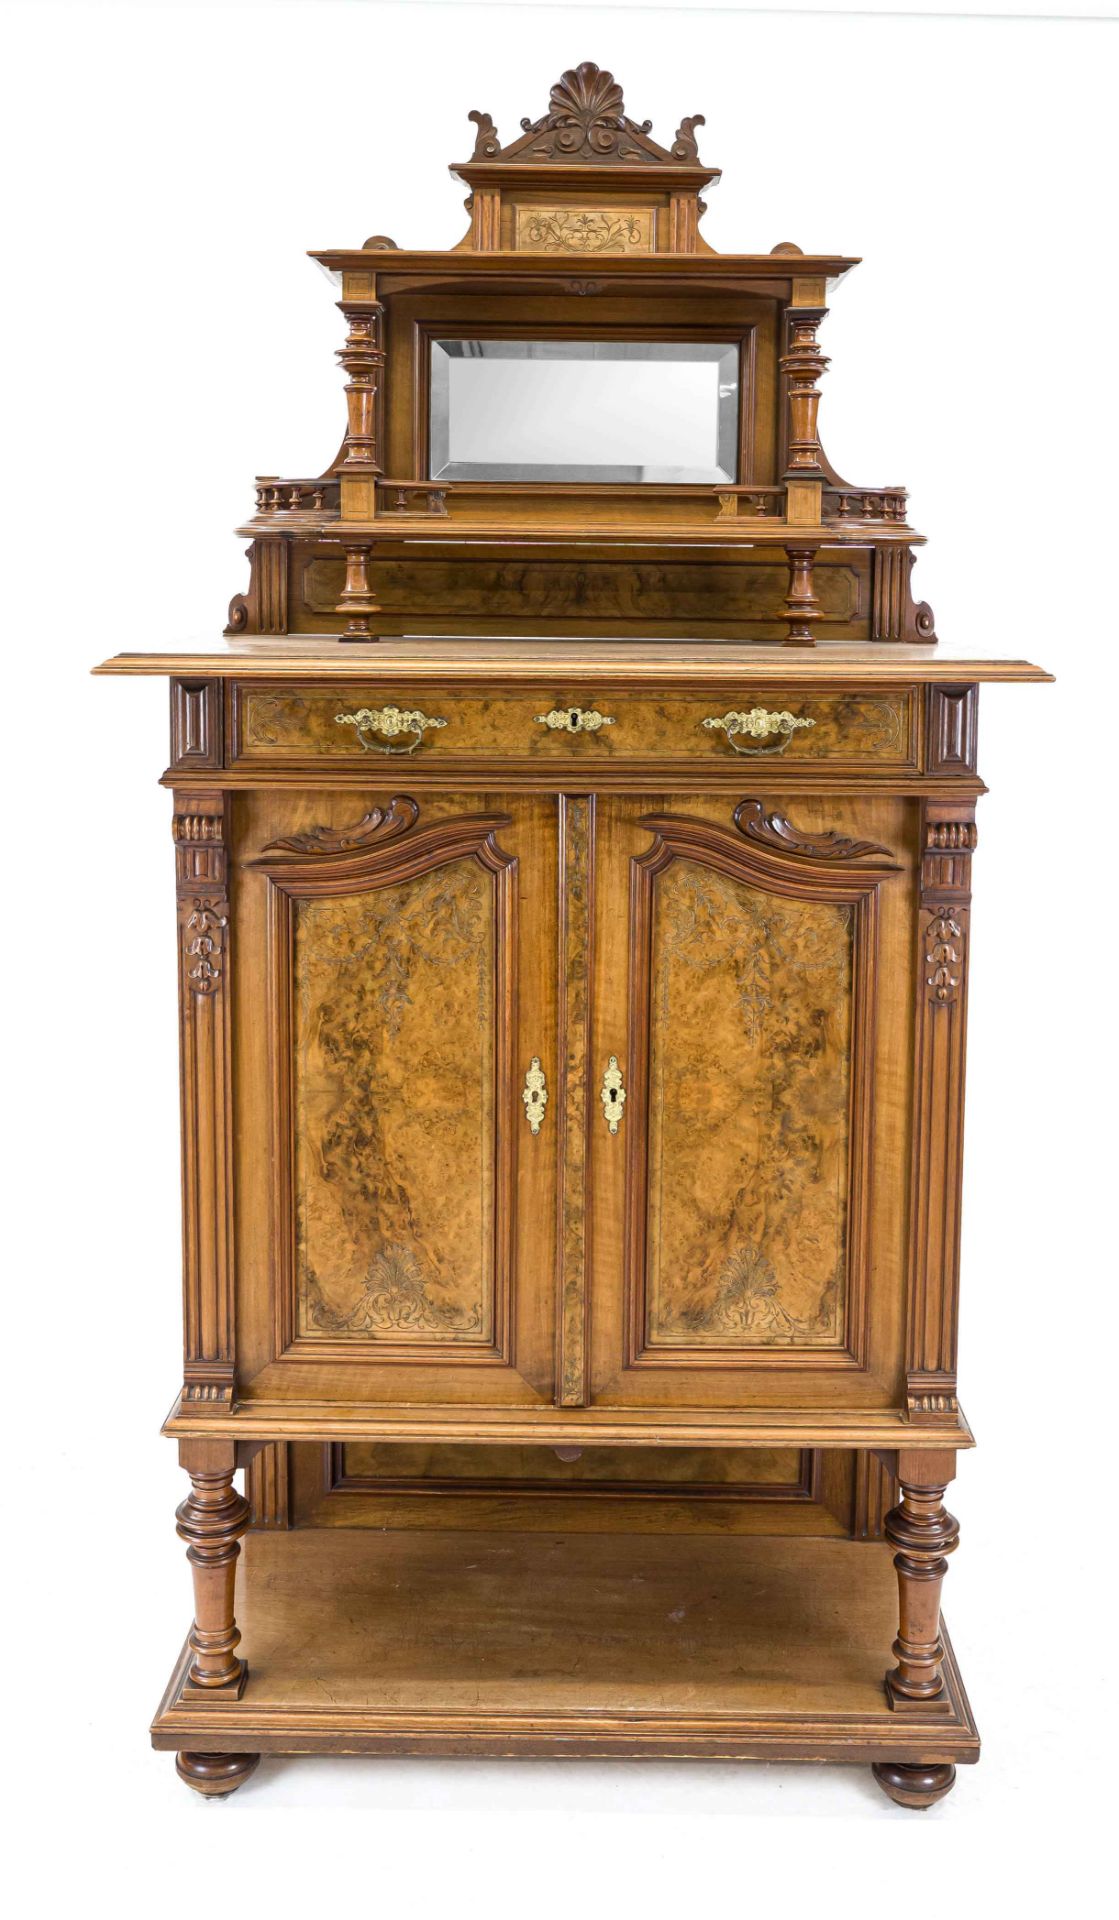 Vertico with mirrored top around 1880, walnut, door panels with fine gilded incised decoration,